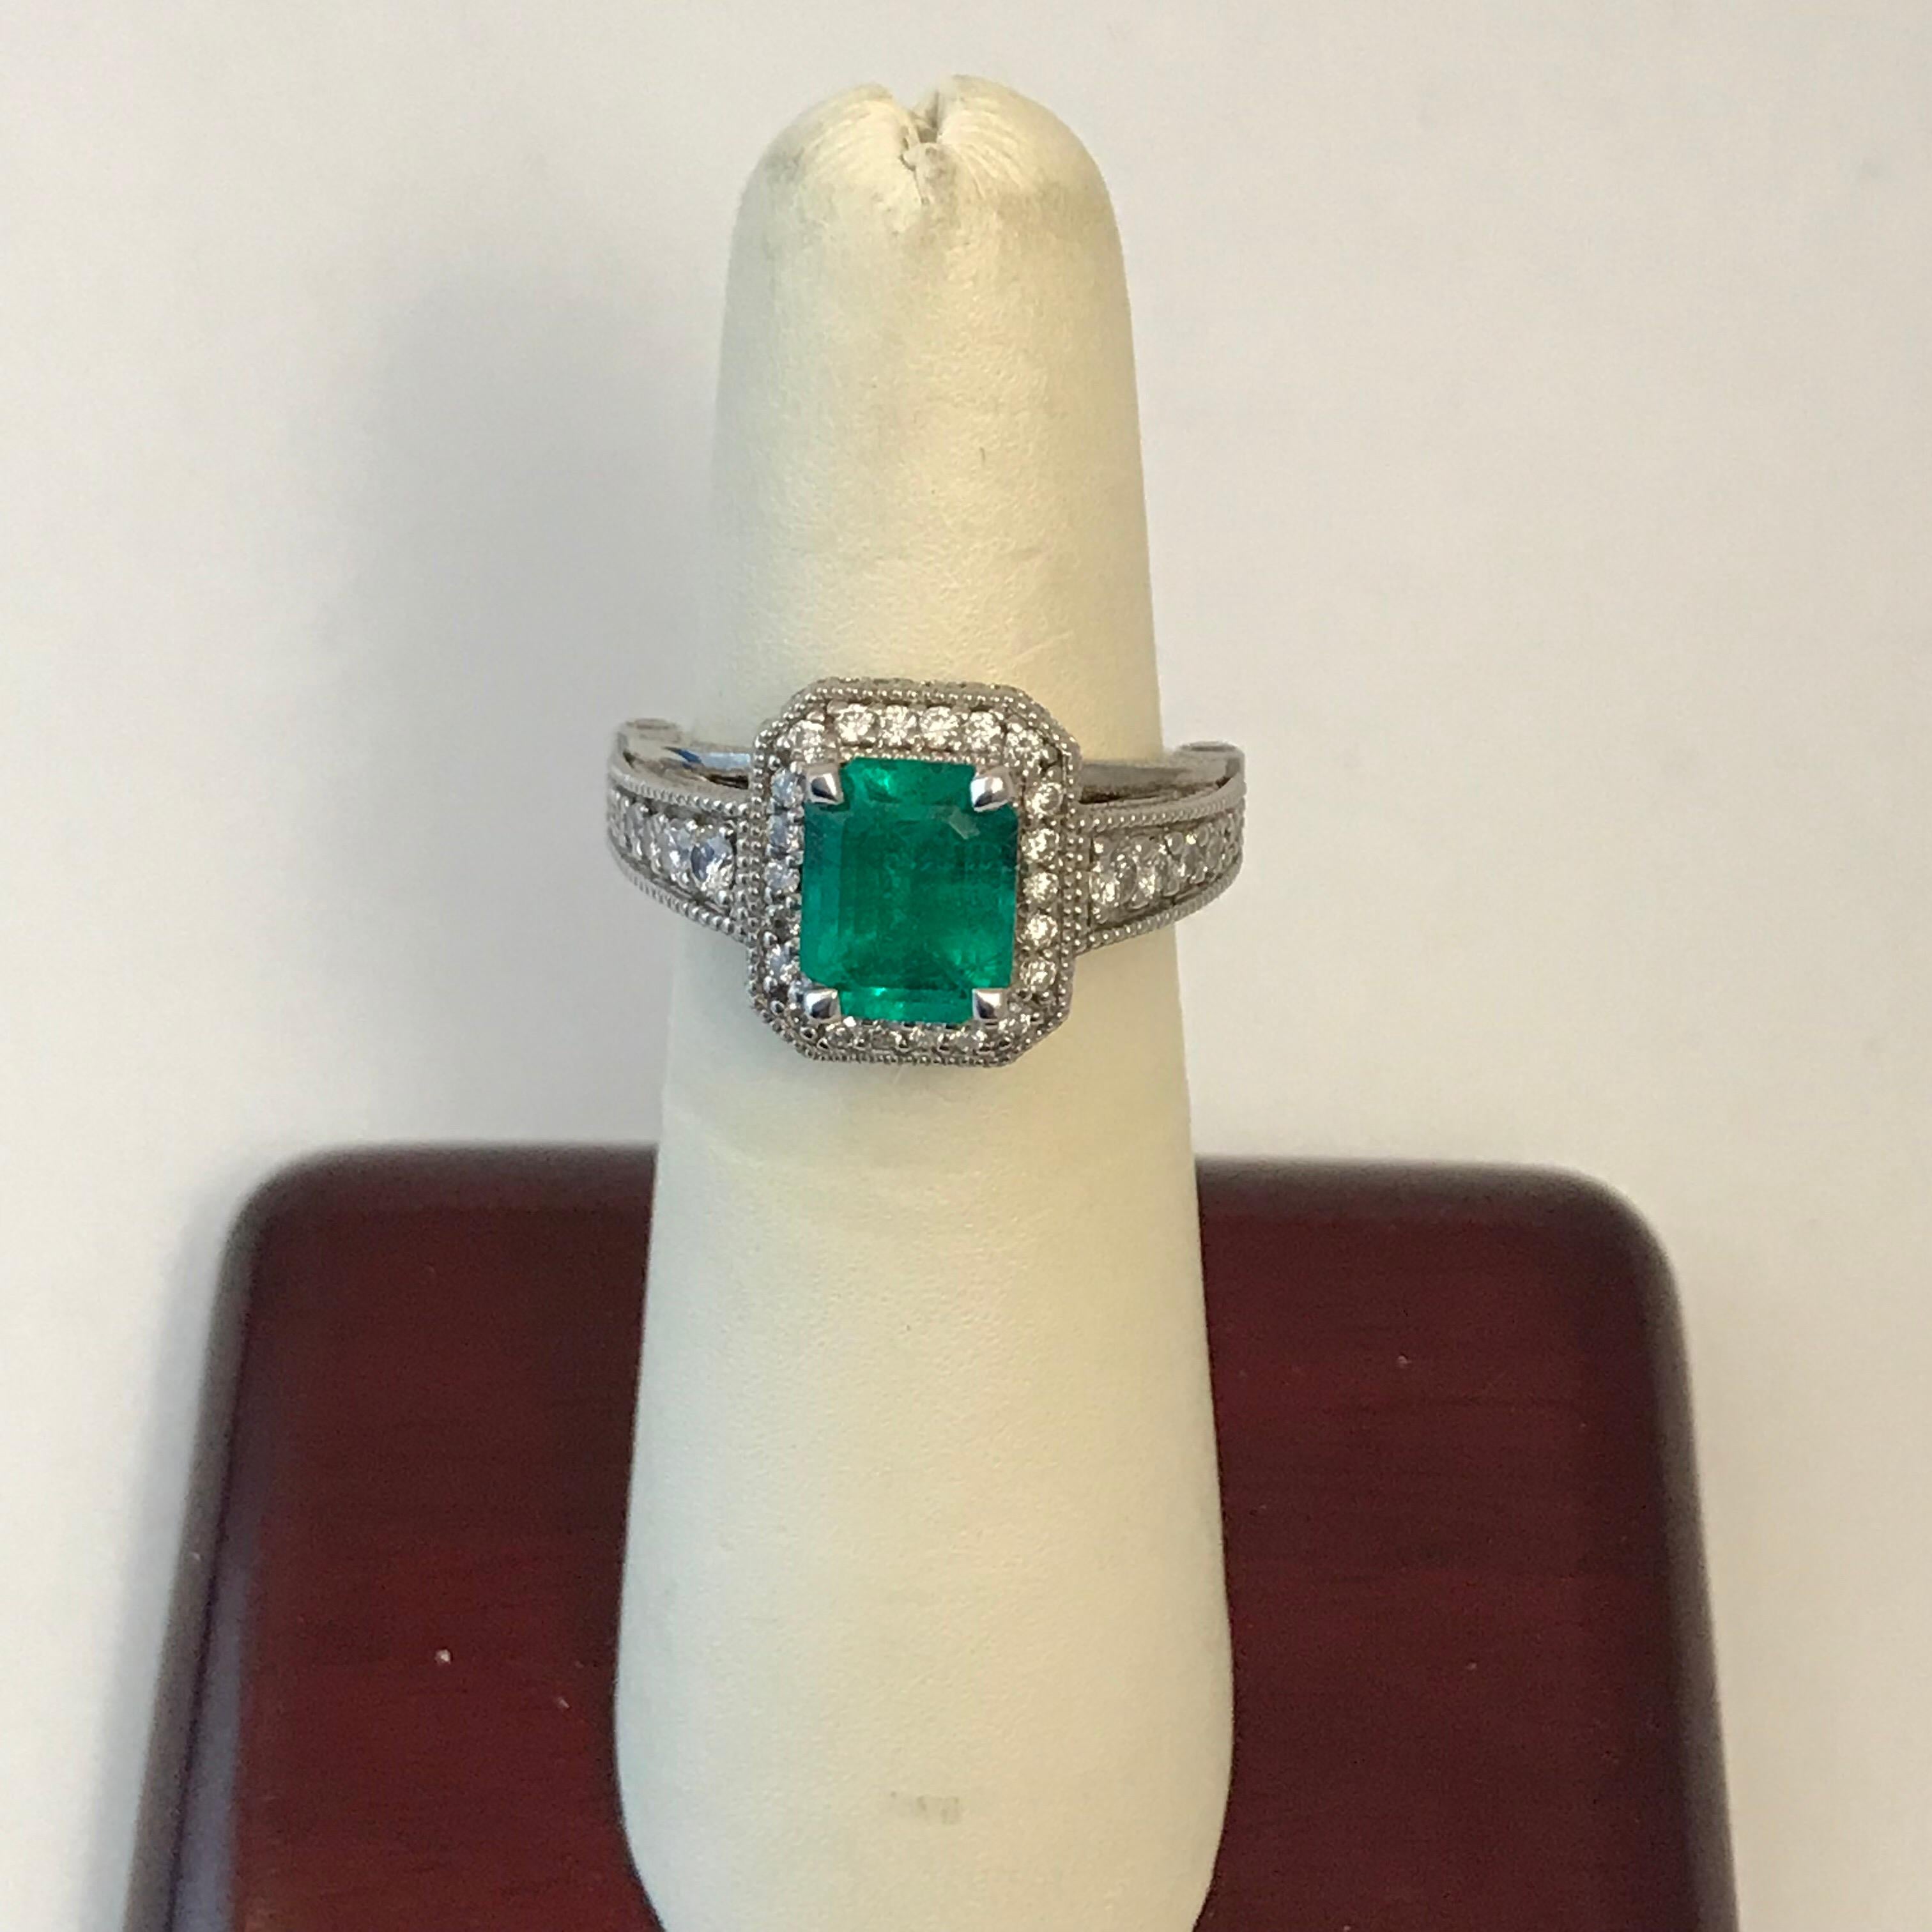 1.56 Carat Colombian Emerald Cocktail Ring Set in 14 Karat White Gold In New Condition For Sale In Austin, TX